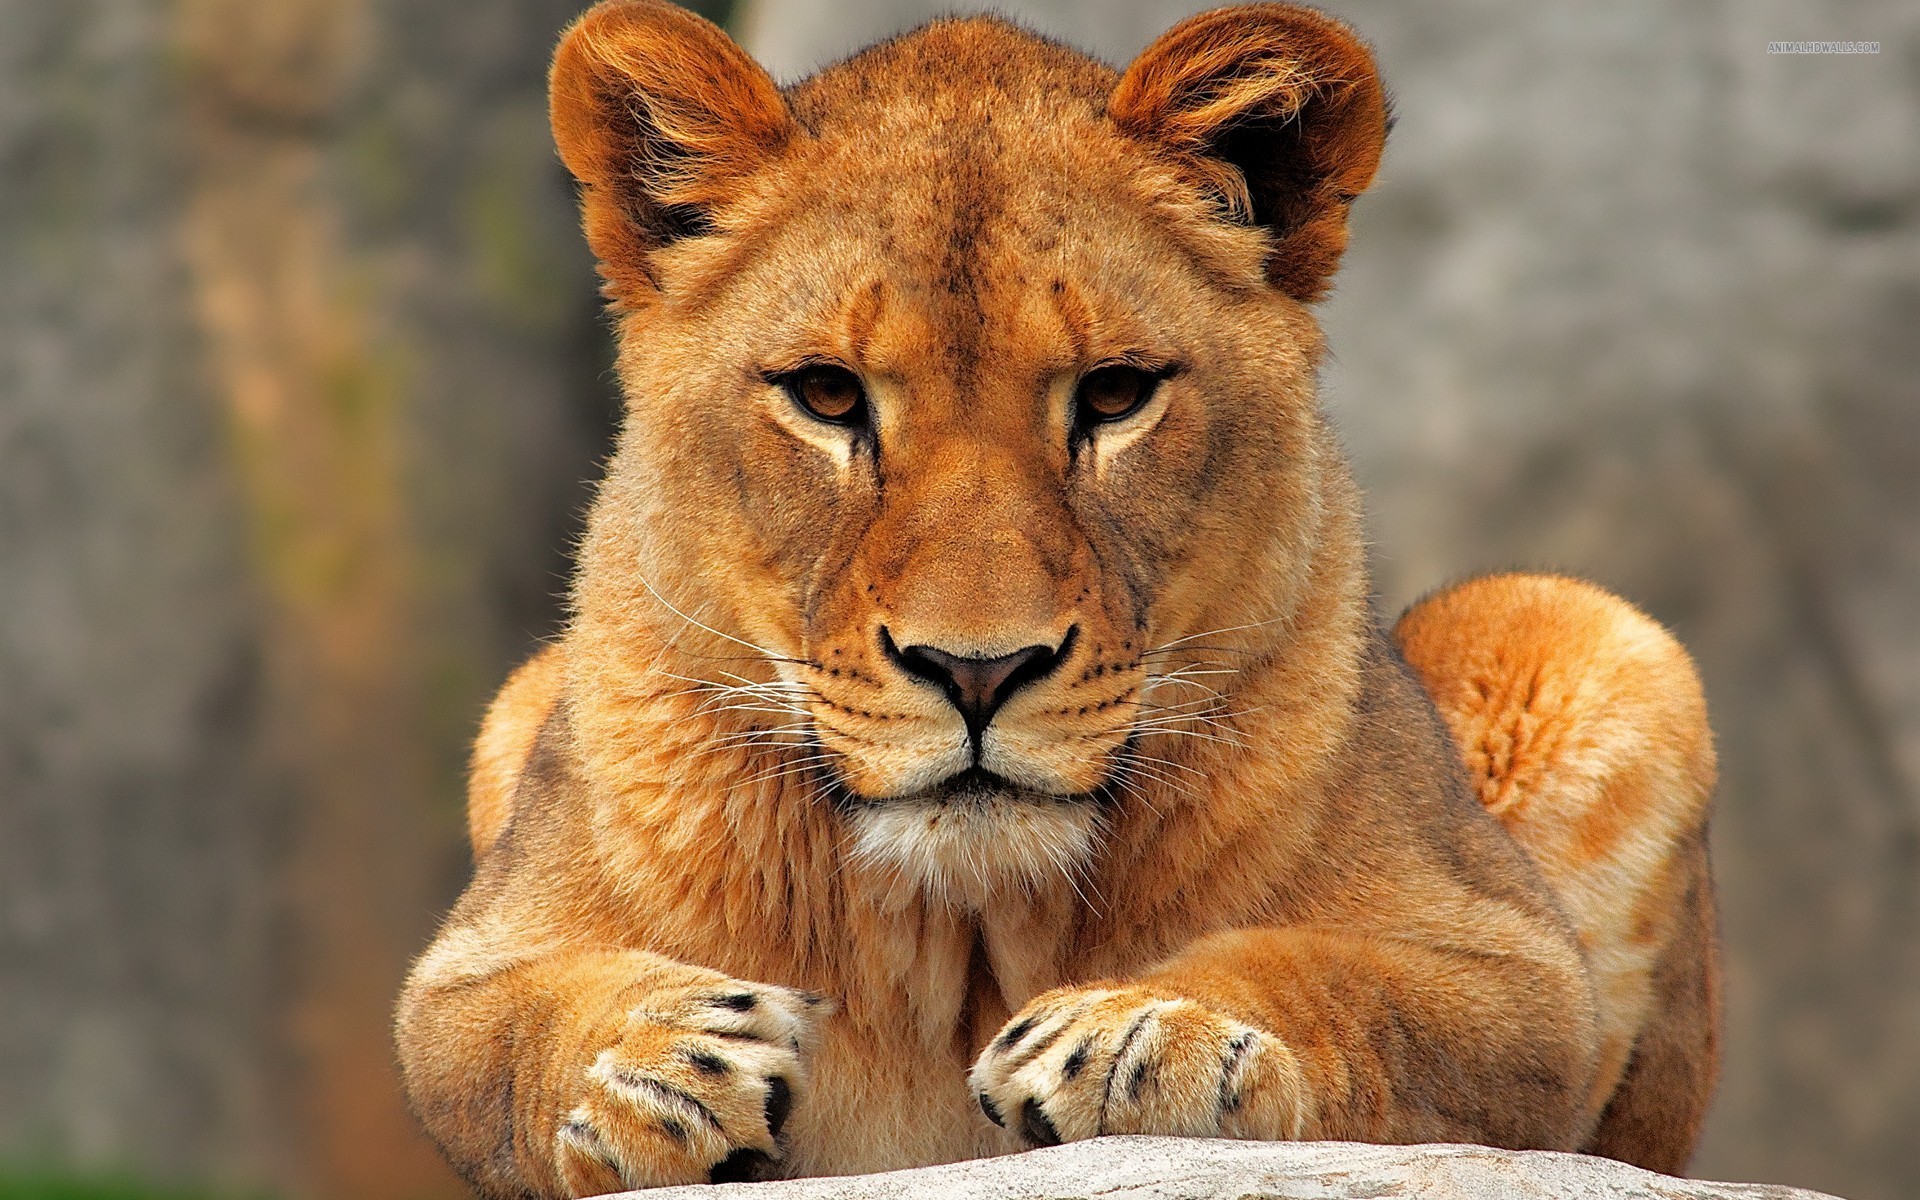 lioness, wallpapers, lion Lioness Wallpapers - Full HD wallpaper search